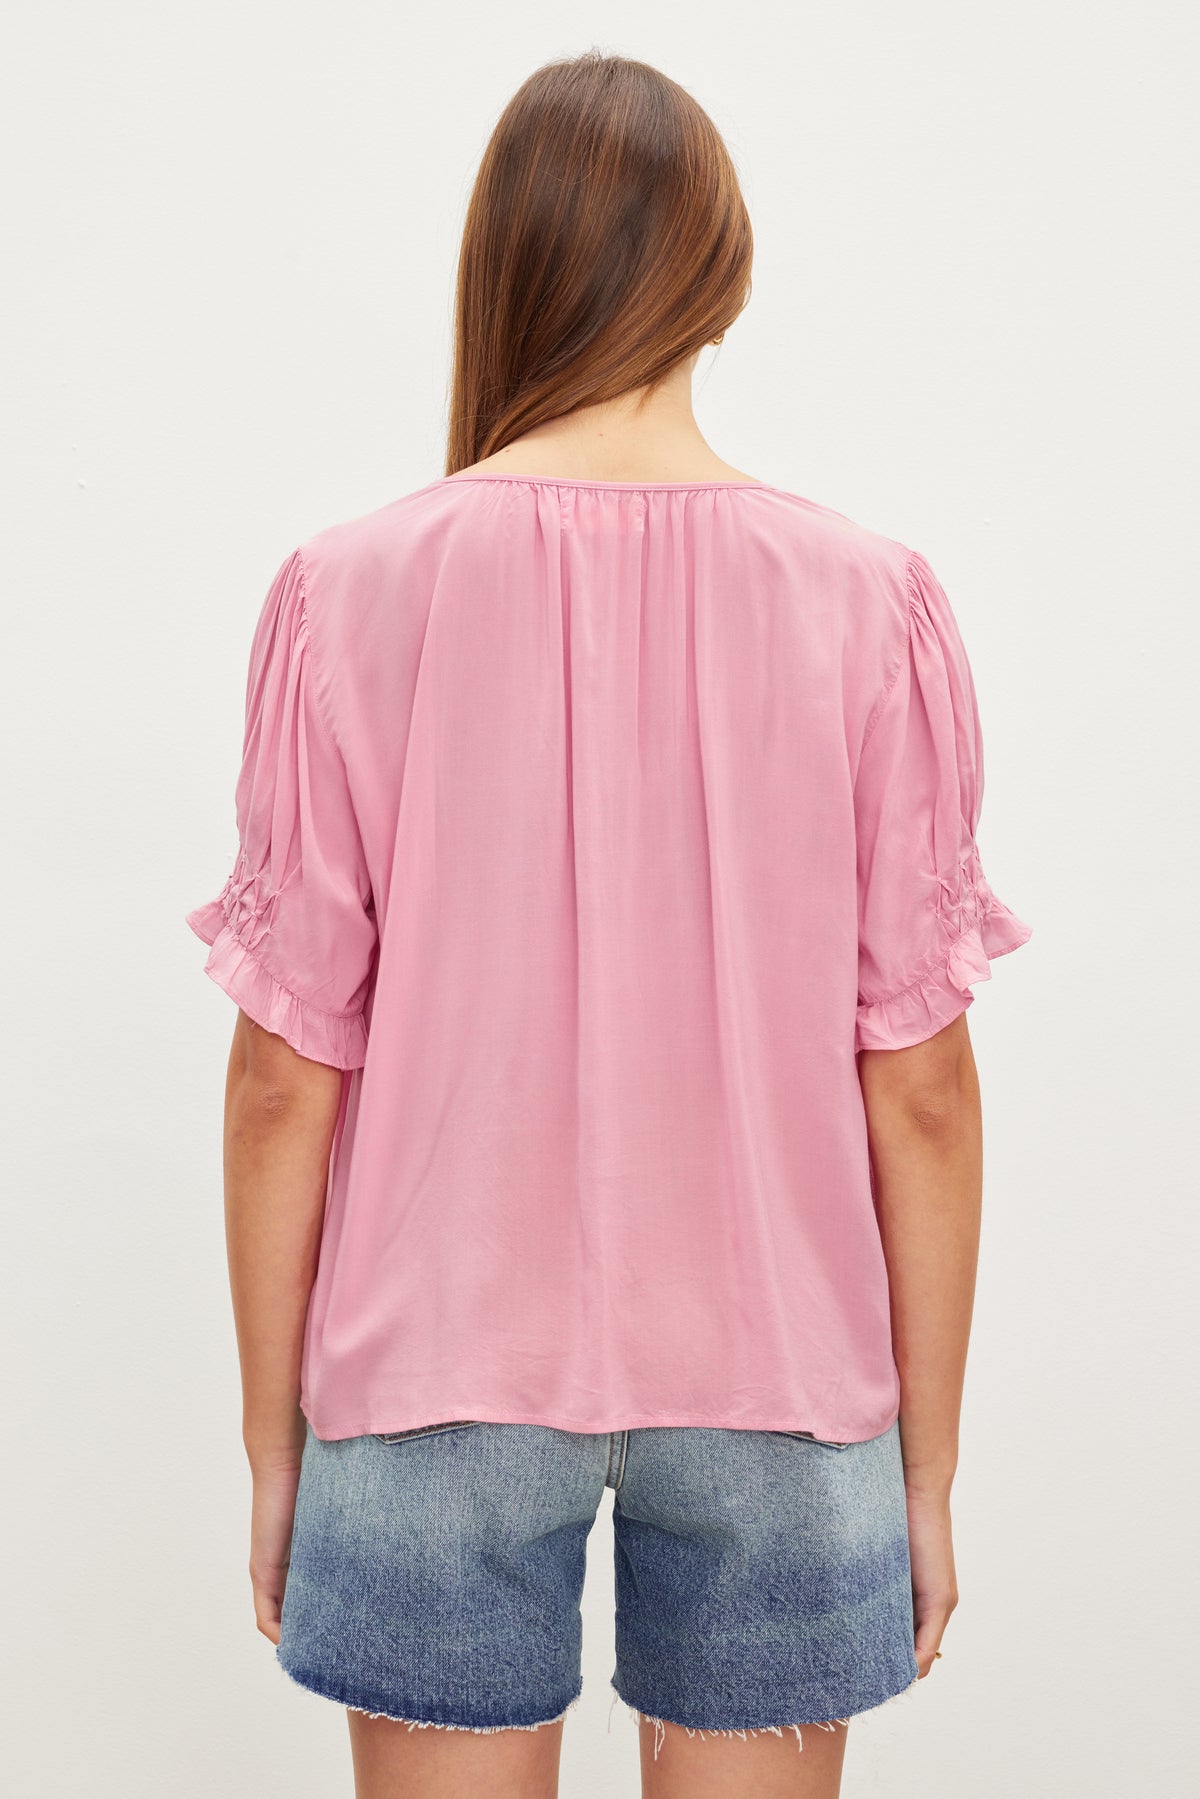 Woman standing with her back to the camera, wearing a pink Velvet by Graham & Spencer Calissa Split Neck Blouse and denim shorts.-36387174547649